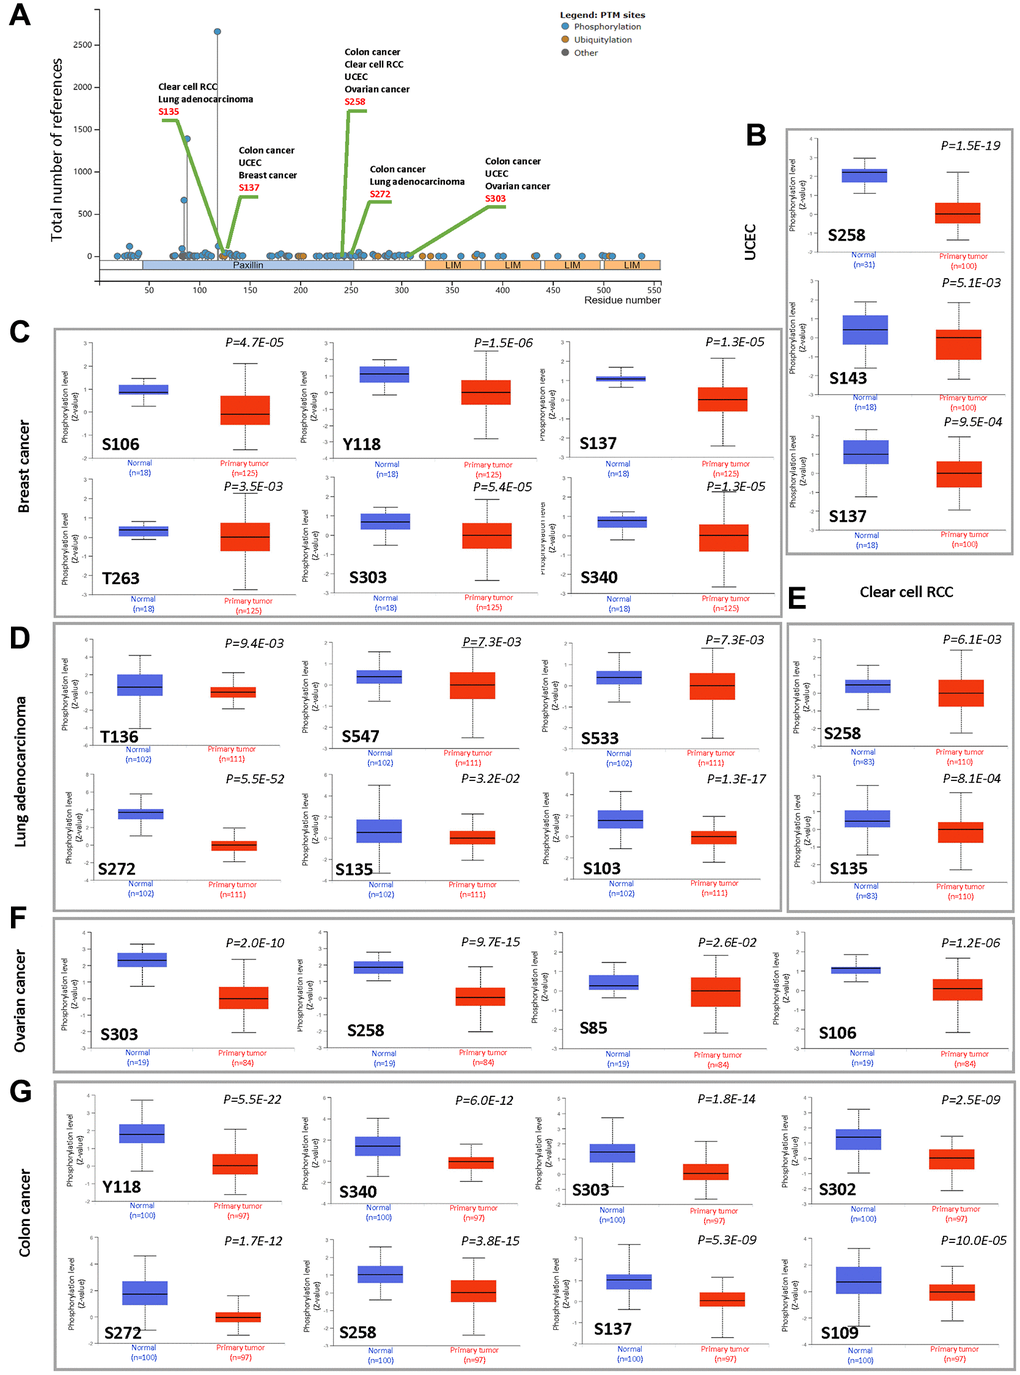 Phosphorylation analysis of the PXN protein in different cancers. Using the CPTAC dataset, we analyzed the expression level of PXN phosphoproteins (S135, S137, S258, S272, S303, S106, Y118, T263, S340, S143, S136, S547, S533, S272, S103, S85, S302, and S109 sites) between normal tissue and primary tissue of selected tumors with UALCAN. (A) Schematic diagram of PXN protein showing phosphoprotein sites with positive results. Box plots are shown for different cancers: (B) UCEC, (C) breast cancer, (D) lung adenocarcinoma, (E) RCC, (F) ovarian cancer, and (G) colon cancer.